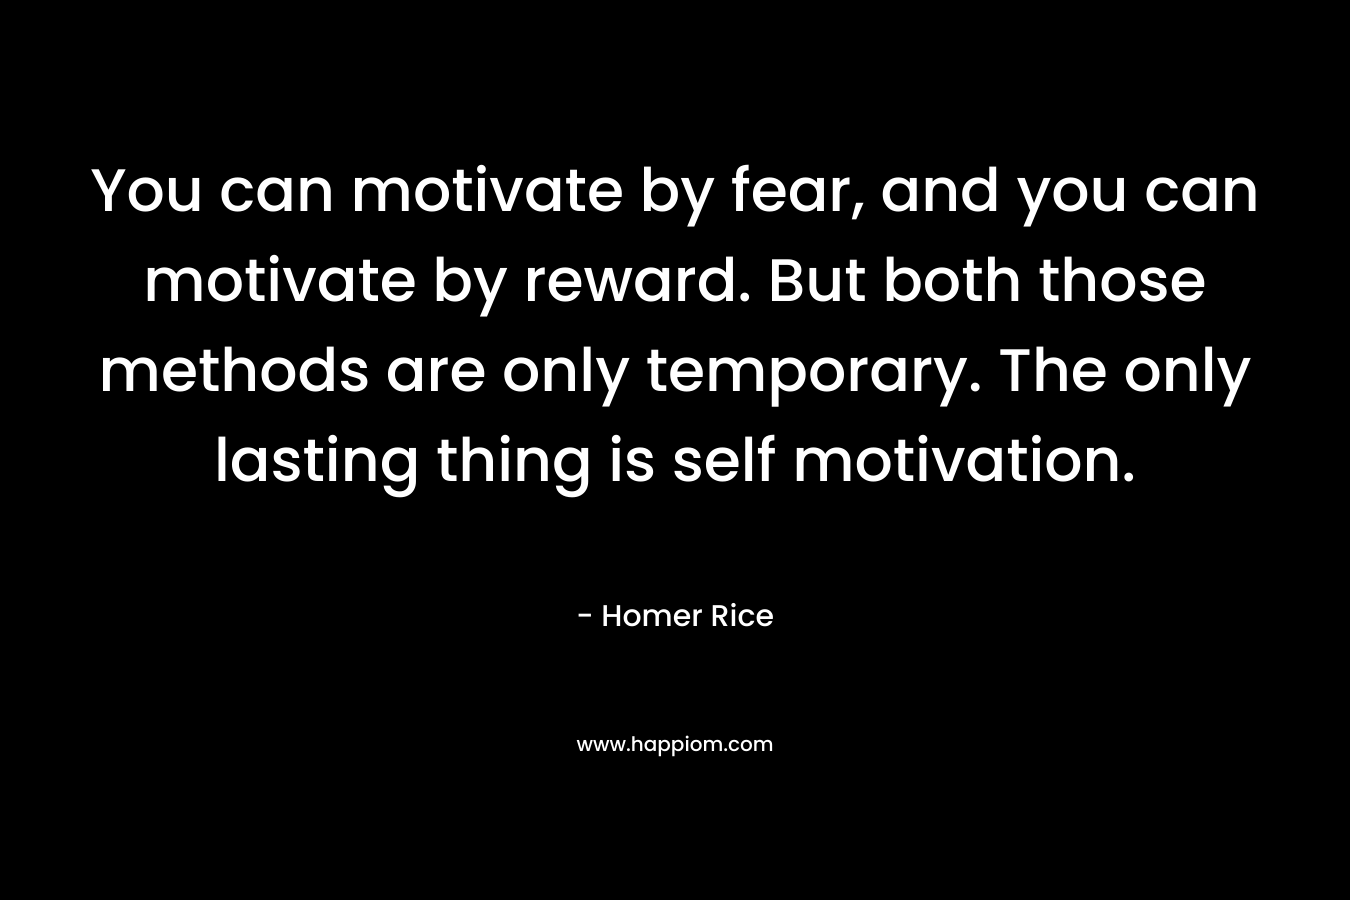 You can motivate by fear, and you can motivate by reward. But both those methods are only temporary. The only lasting thing is self motivation.